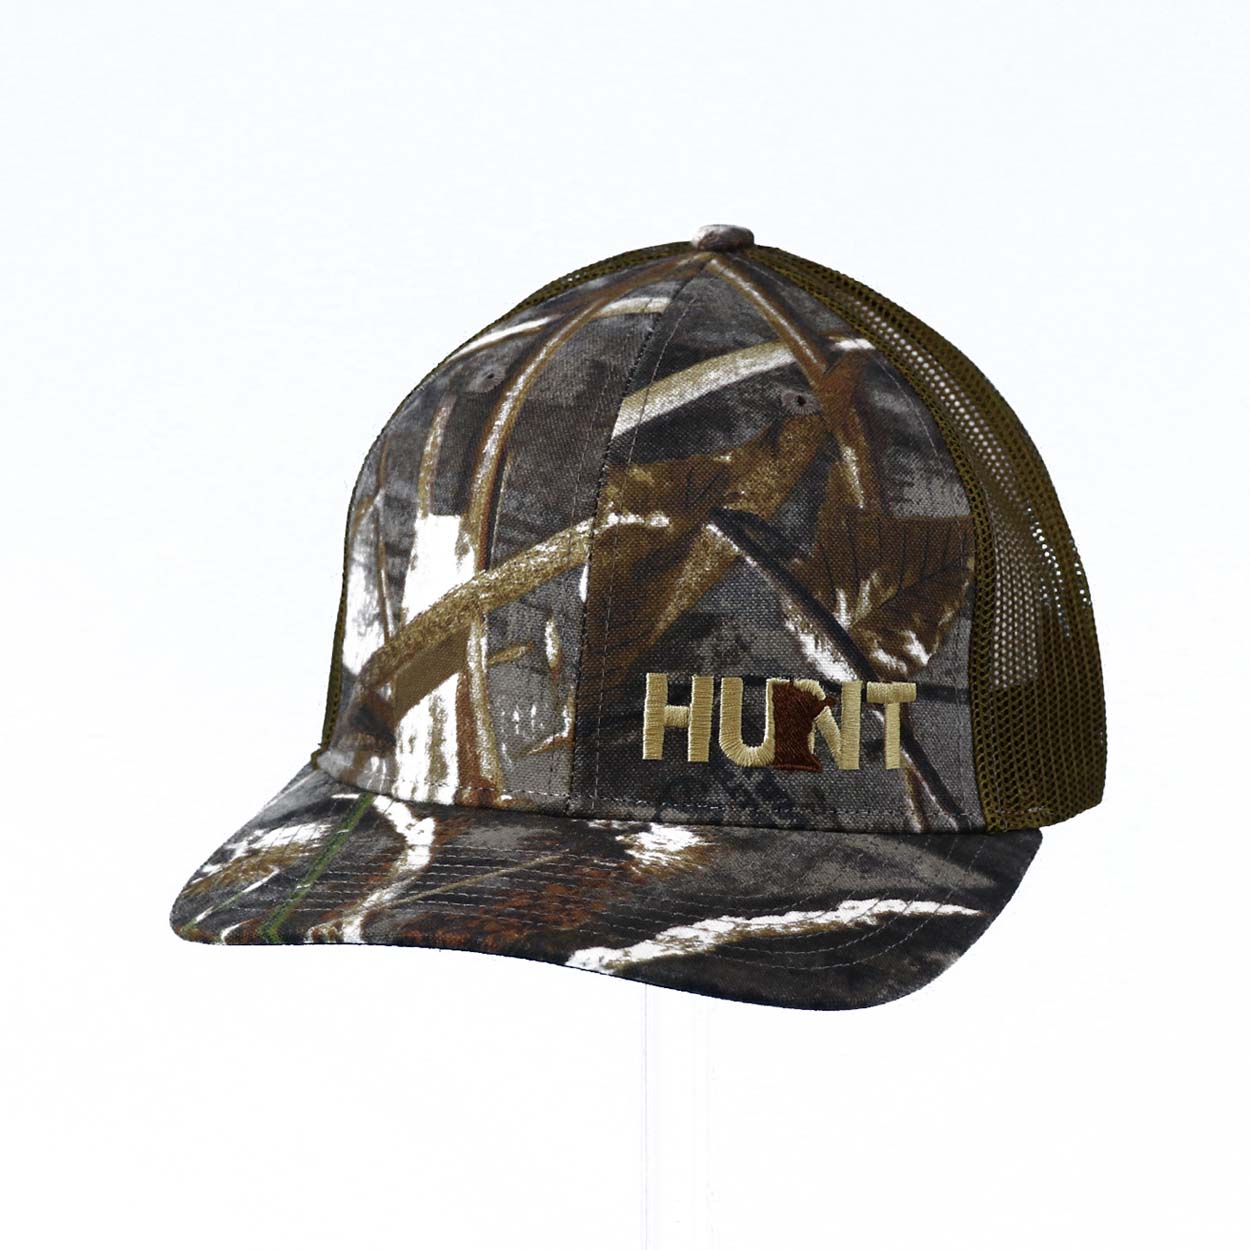 Hunt Minnesota Classic Pro Night Out Embroidered Snapback Trucker Hat Realtree Camo Brown/Khaki